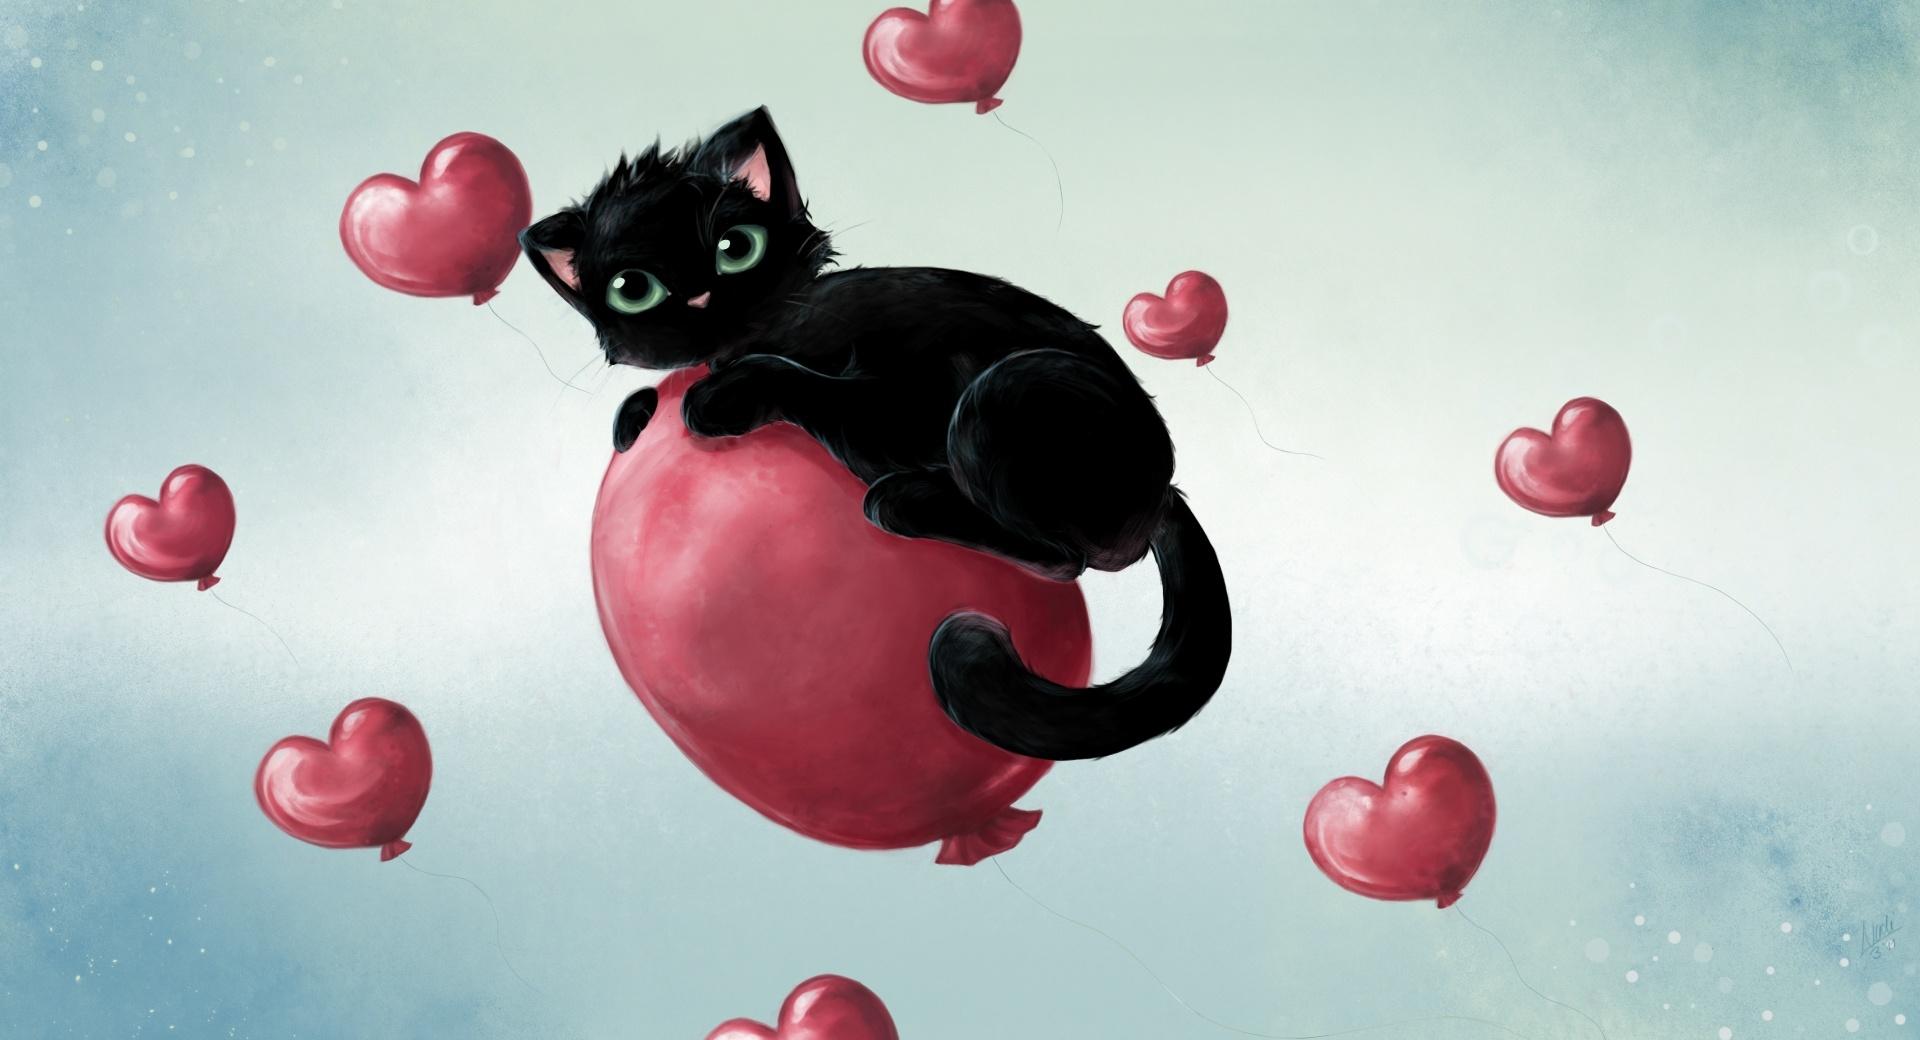 Black Cat And Heart Balloons wallpapers HD quality